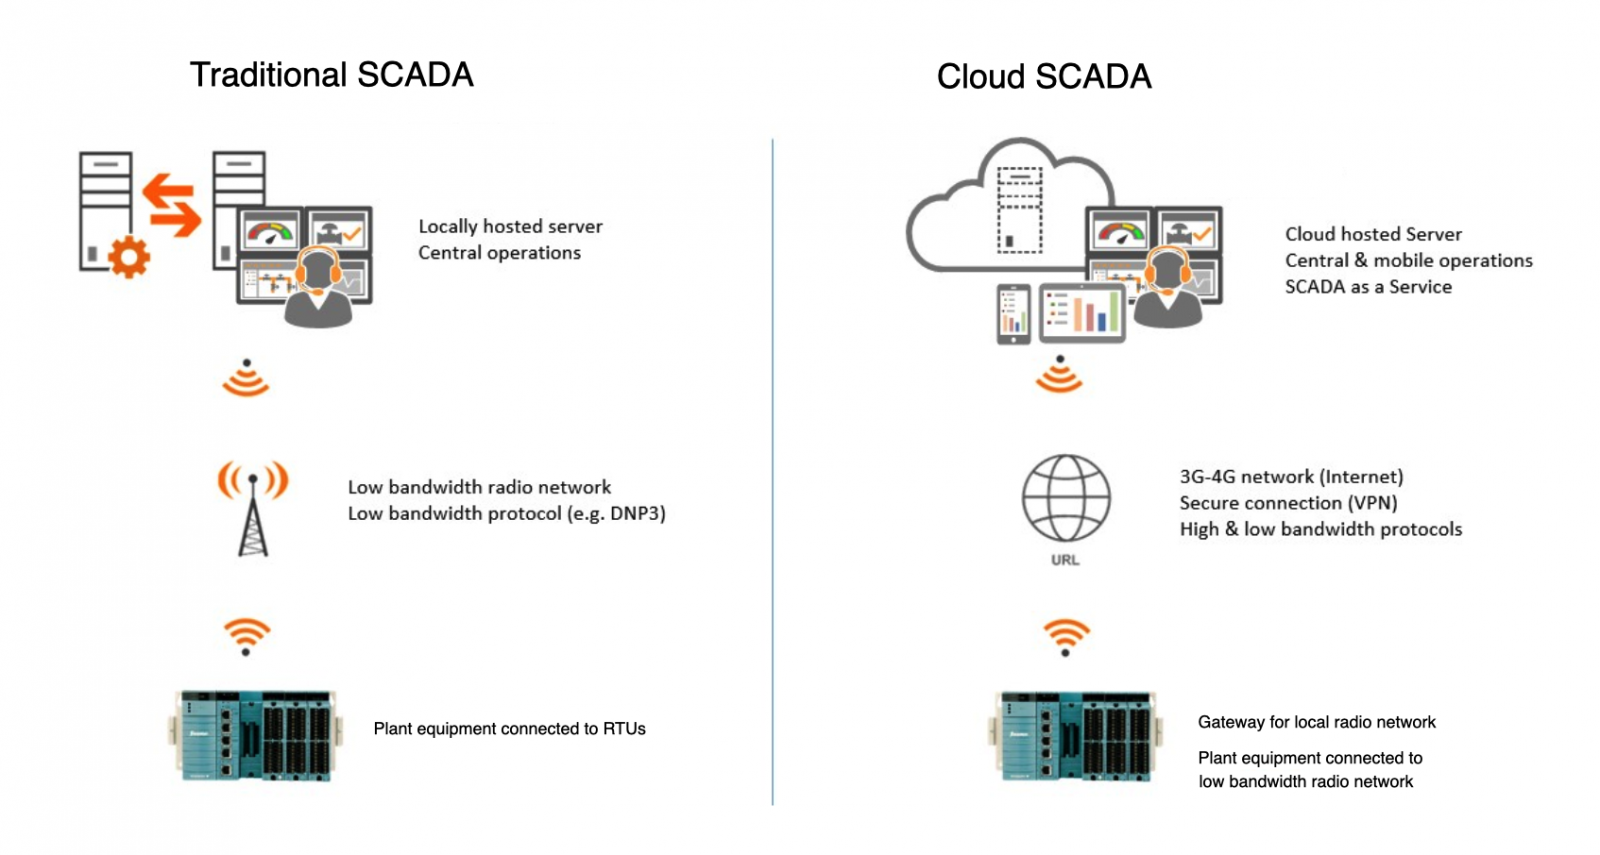 Moving SCADA systems to the cloud :: Common Code